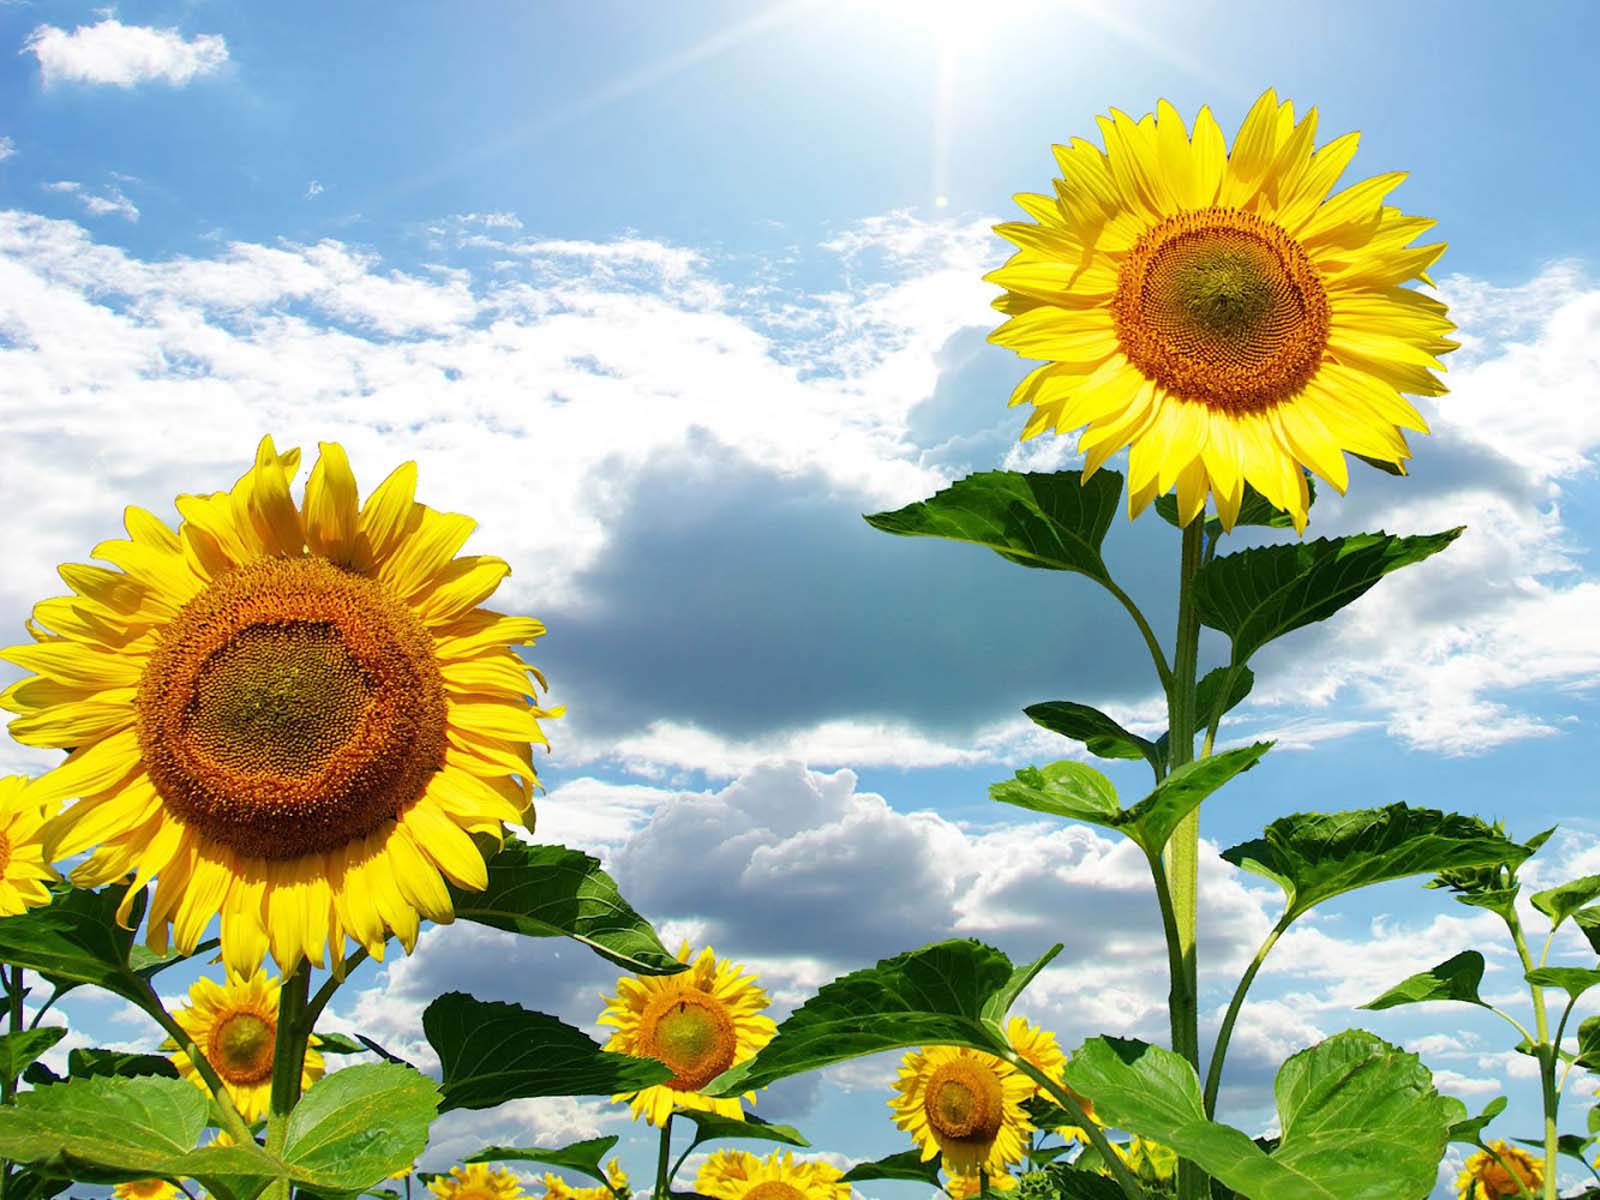 Image Sunflowers Desktop Pc Android iPhone And iPad Wallpaper